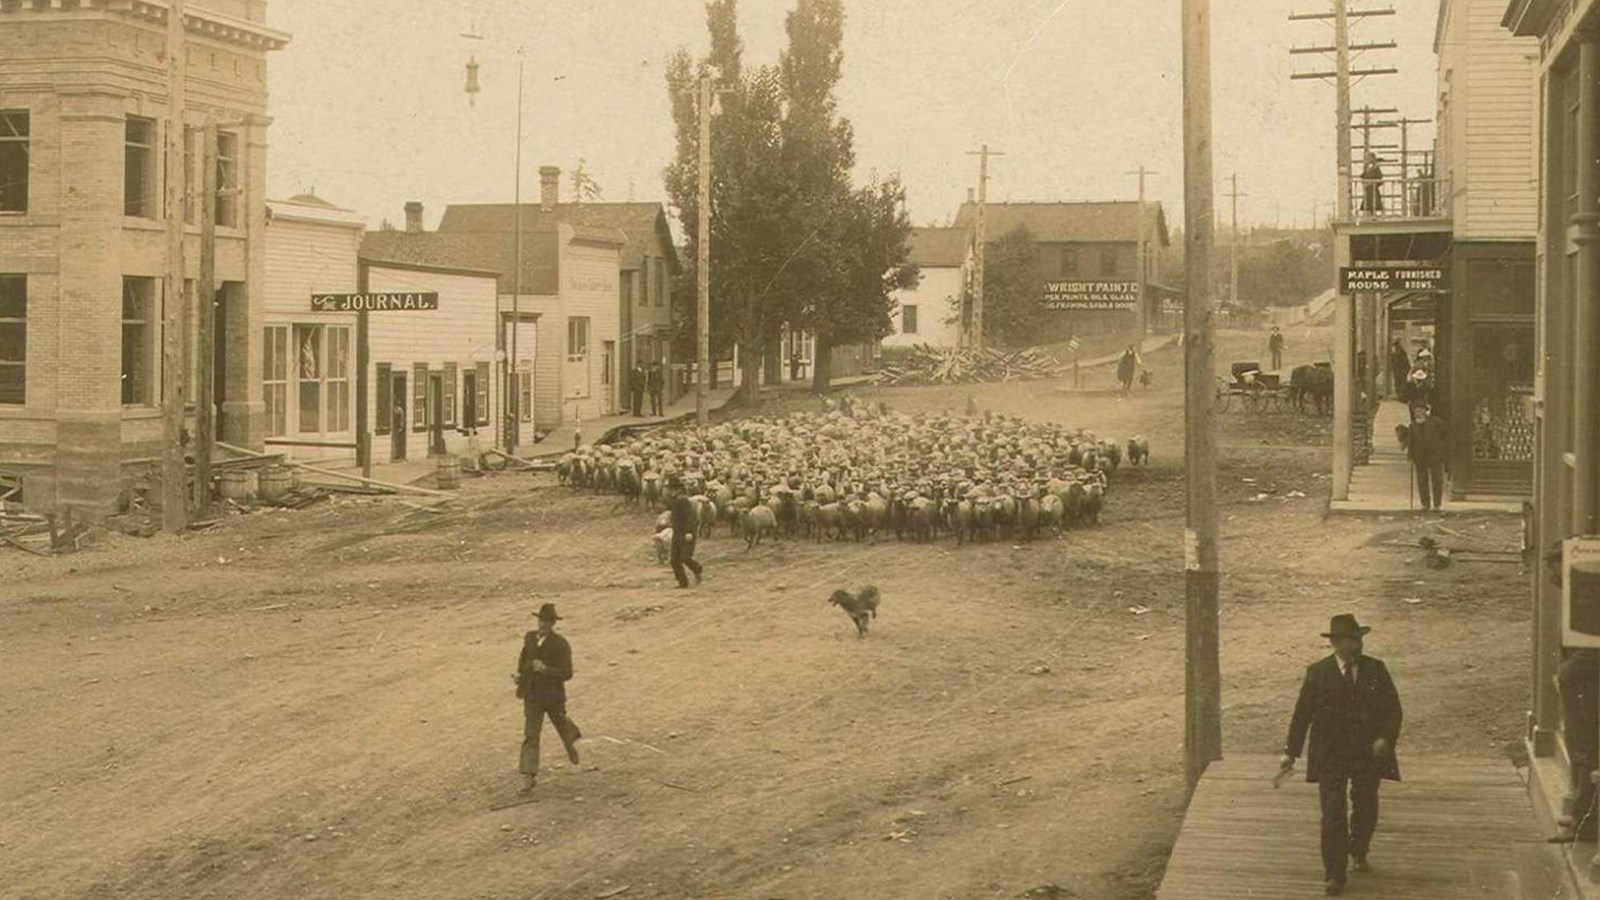 Black and white photograph of a city street with hundreds of sheep walking down the road